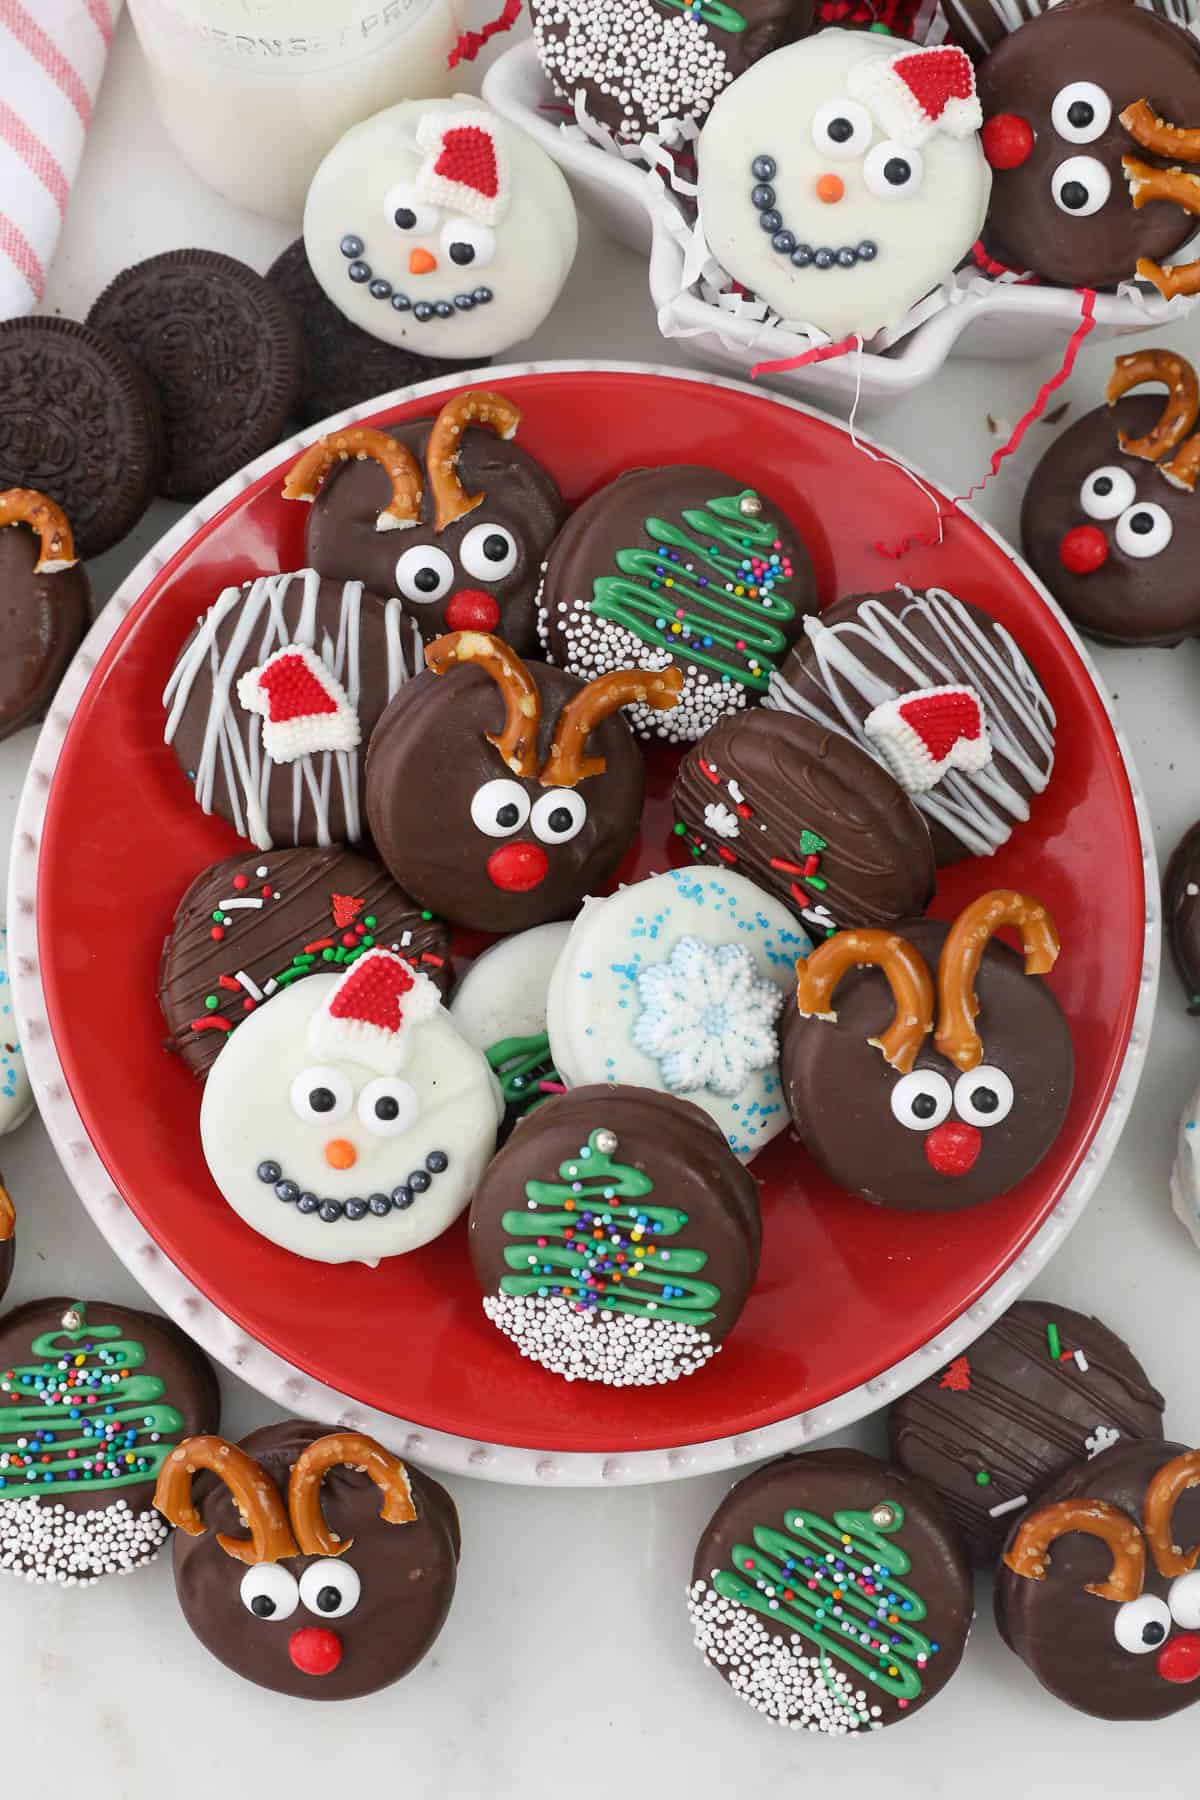 A plate filled with assorted Christmas Oreos decorated to look like reindeer, snowmen, and Christmas trees.